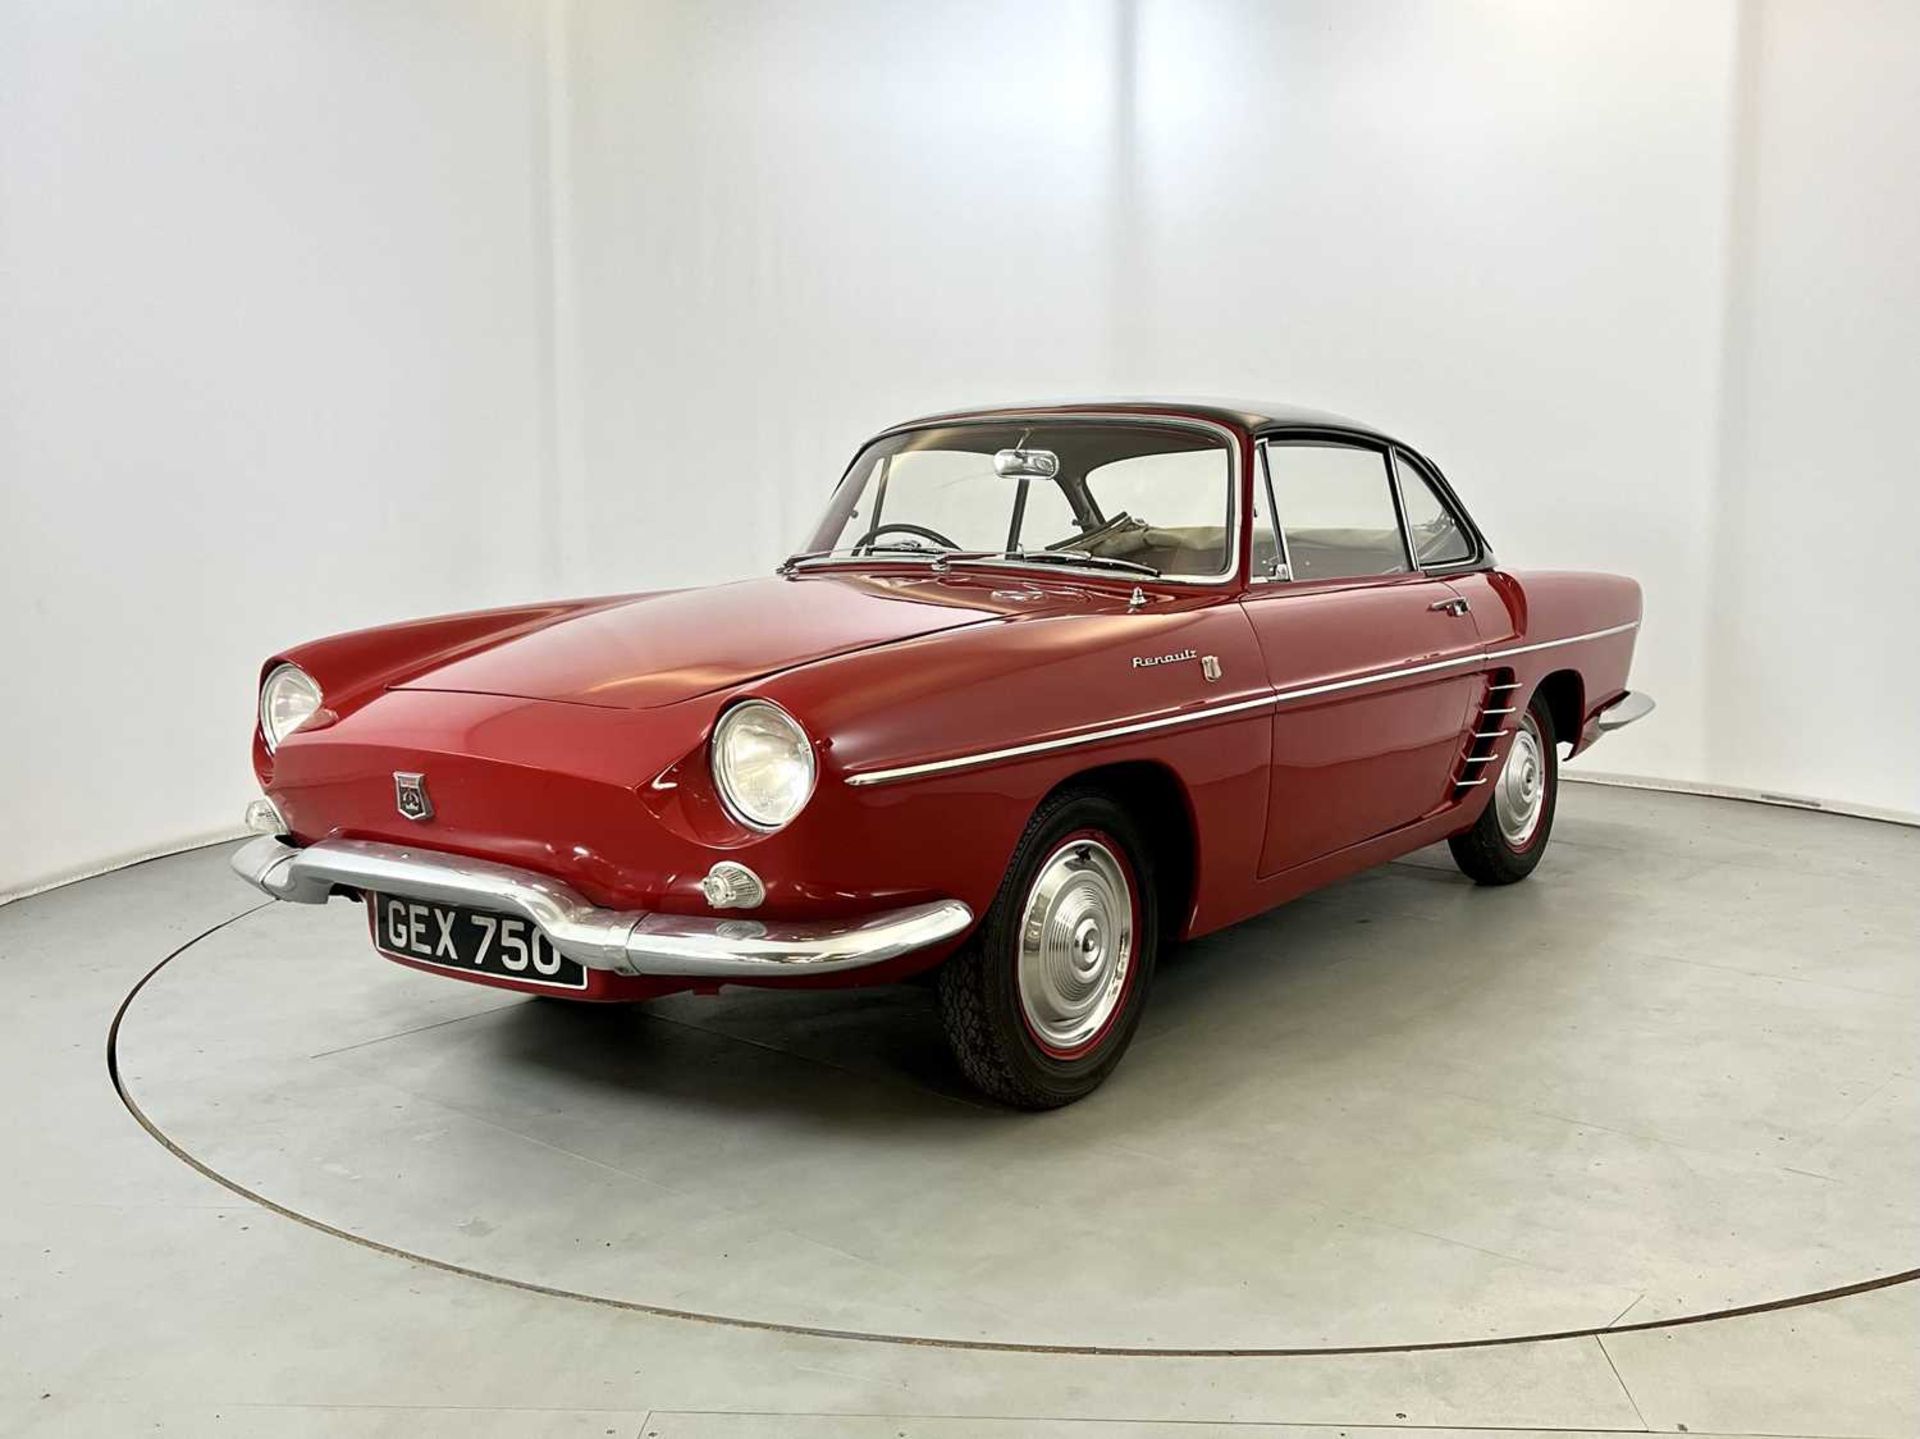 1962 Renault Floride Convertible - Image 3 of 43